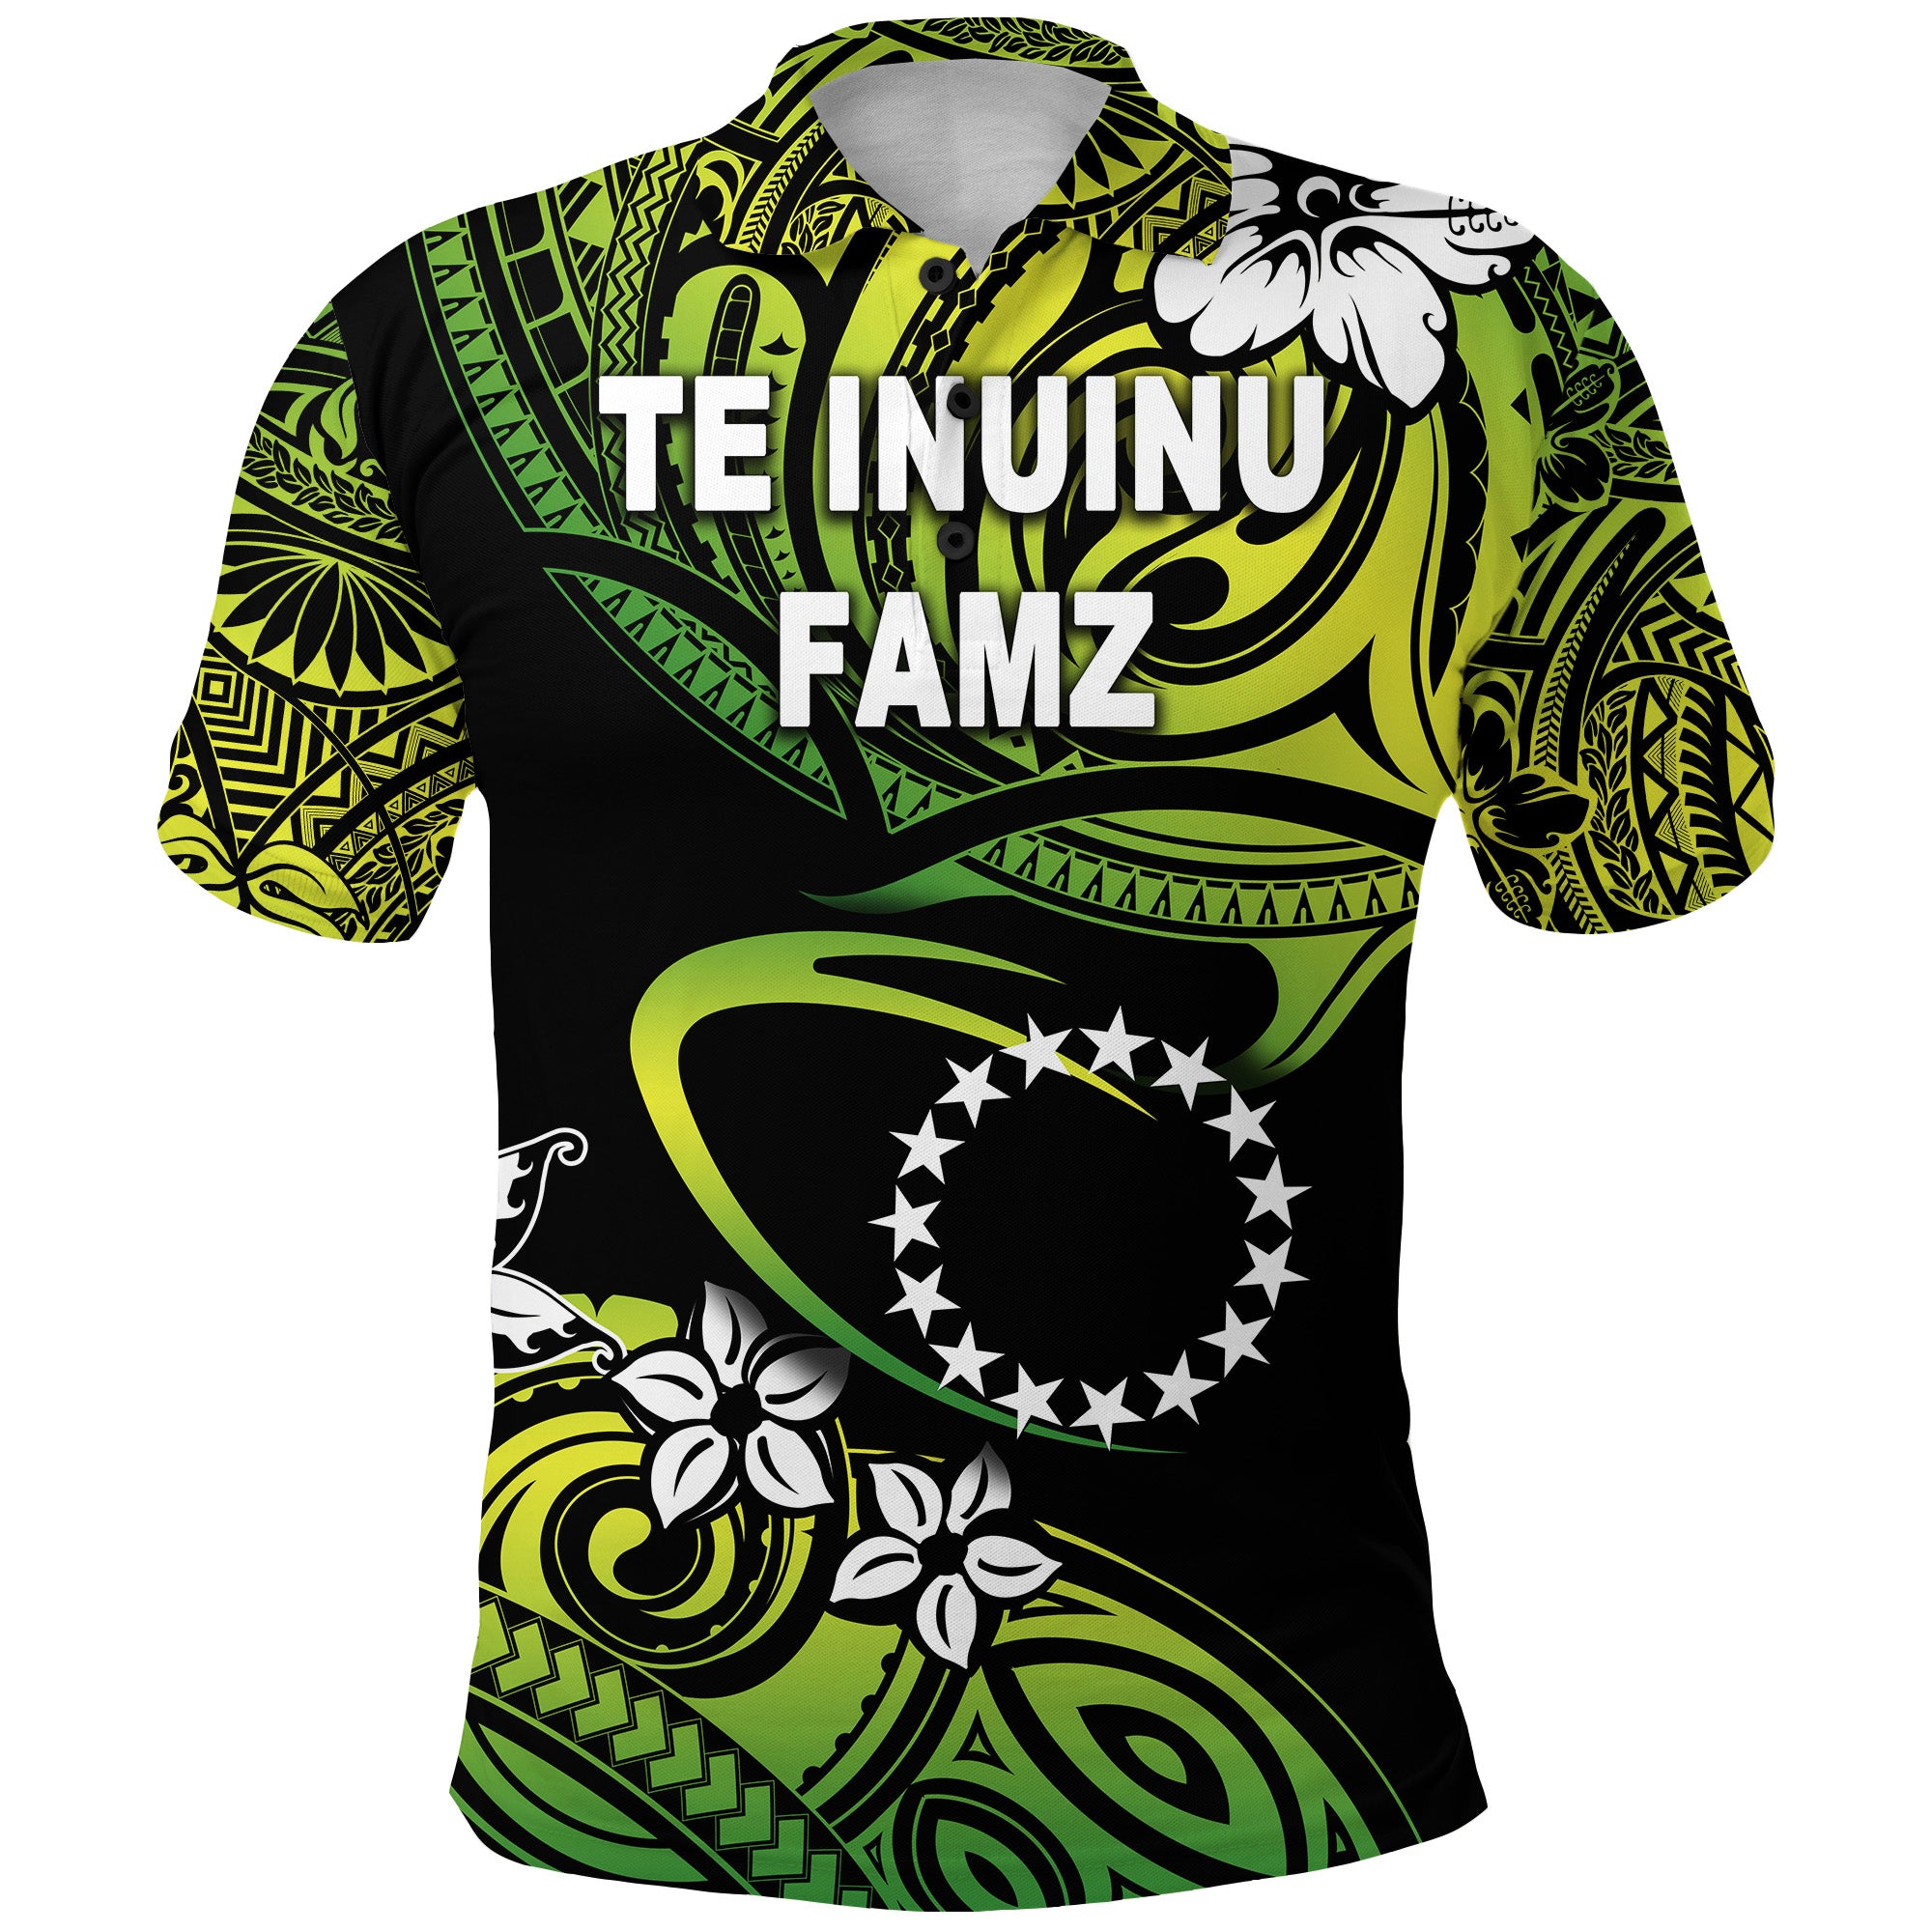 te-inuinu-famz-cook-islands-rugby-polo-shirt-unique-vibes-green